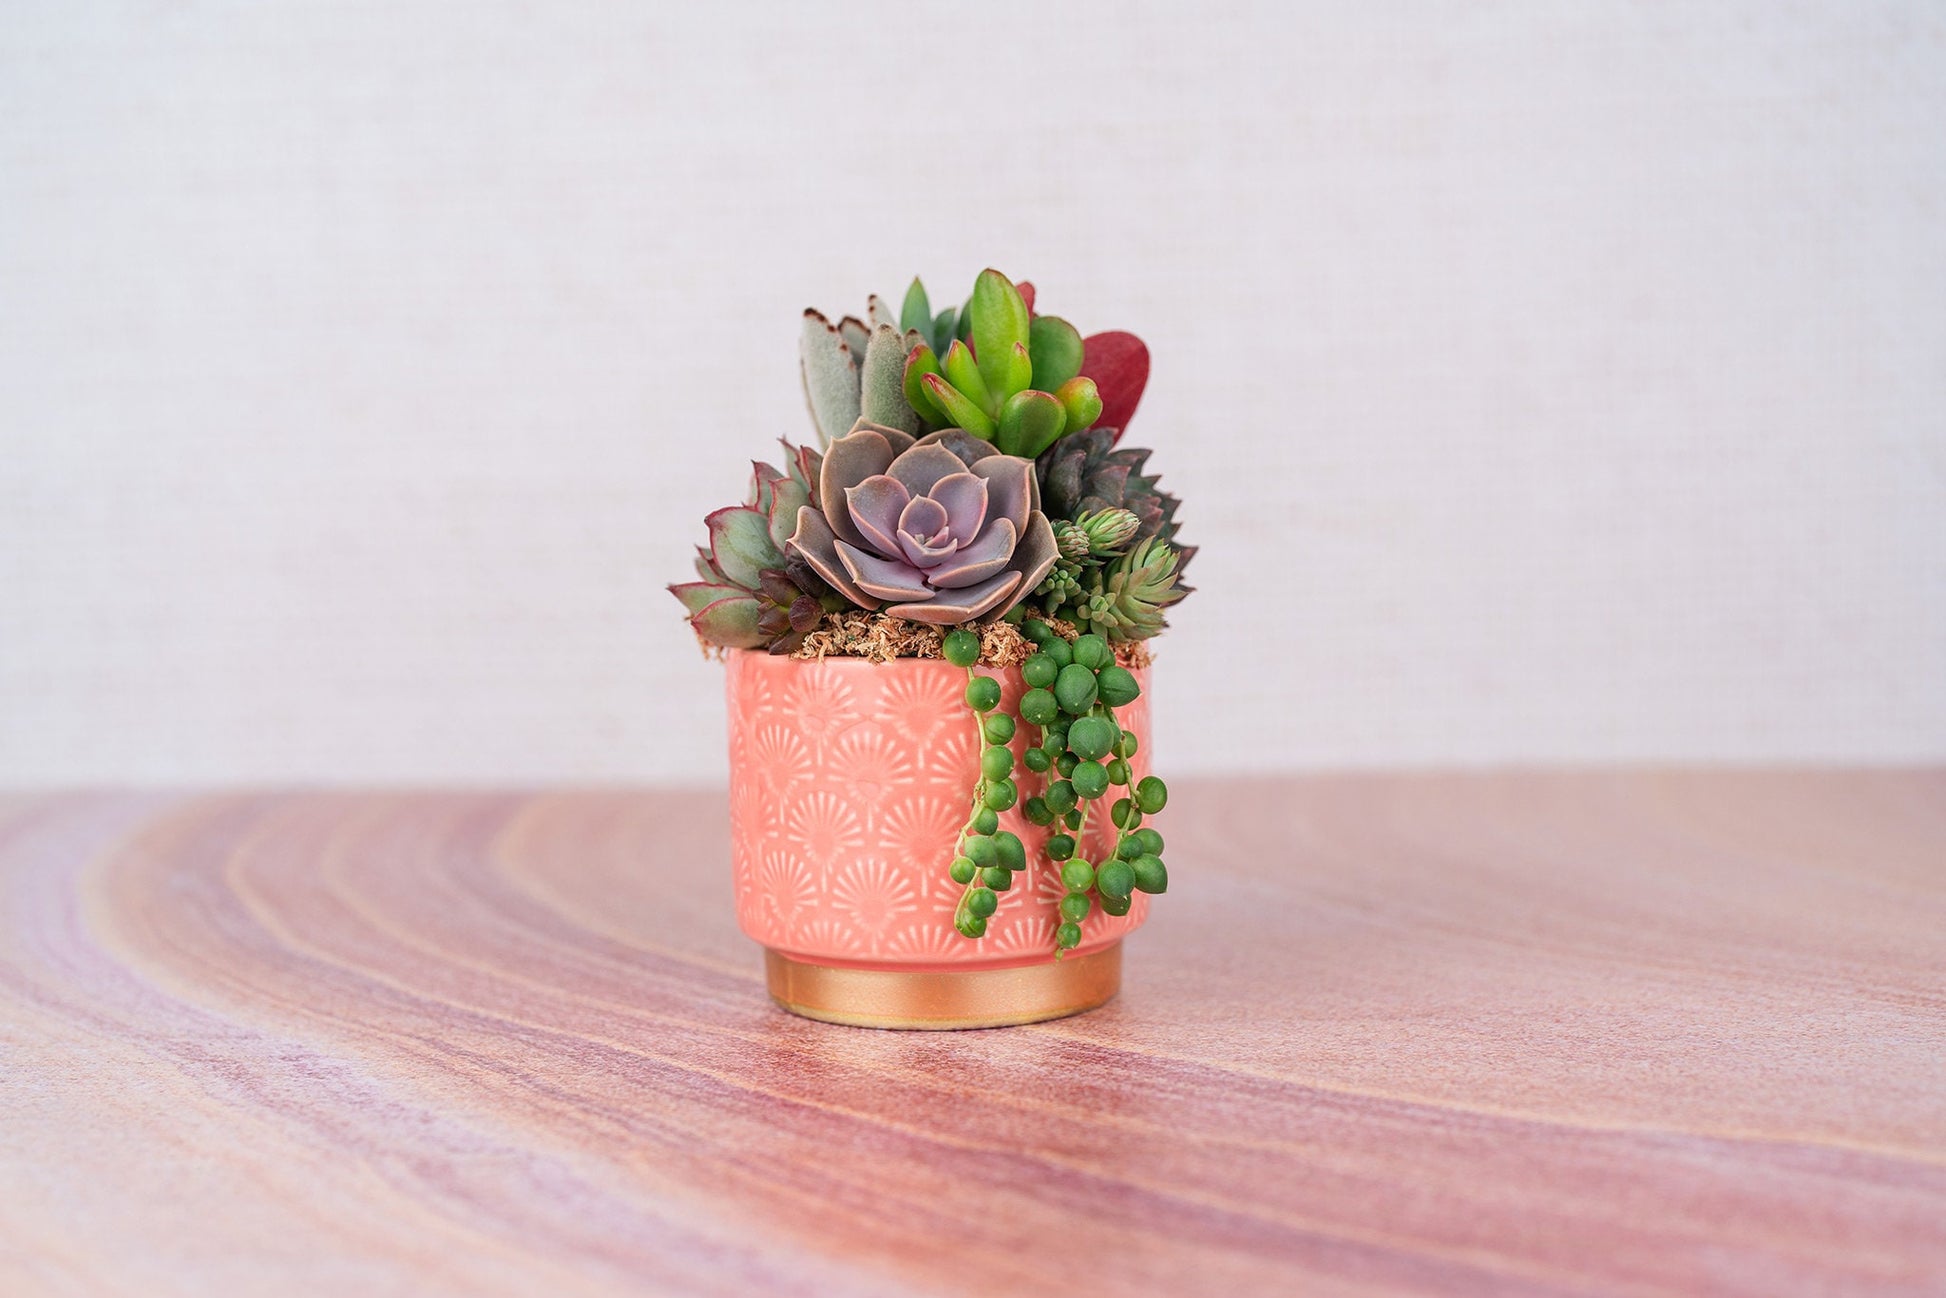 Peach and Gold Patterned Small Living Succulent Arrangement Gift | Birthday, Celebration, Gift for Mom